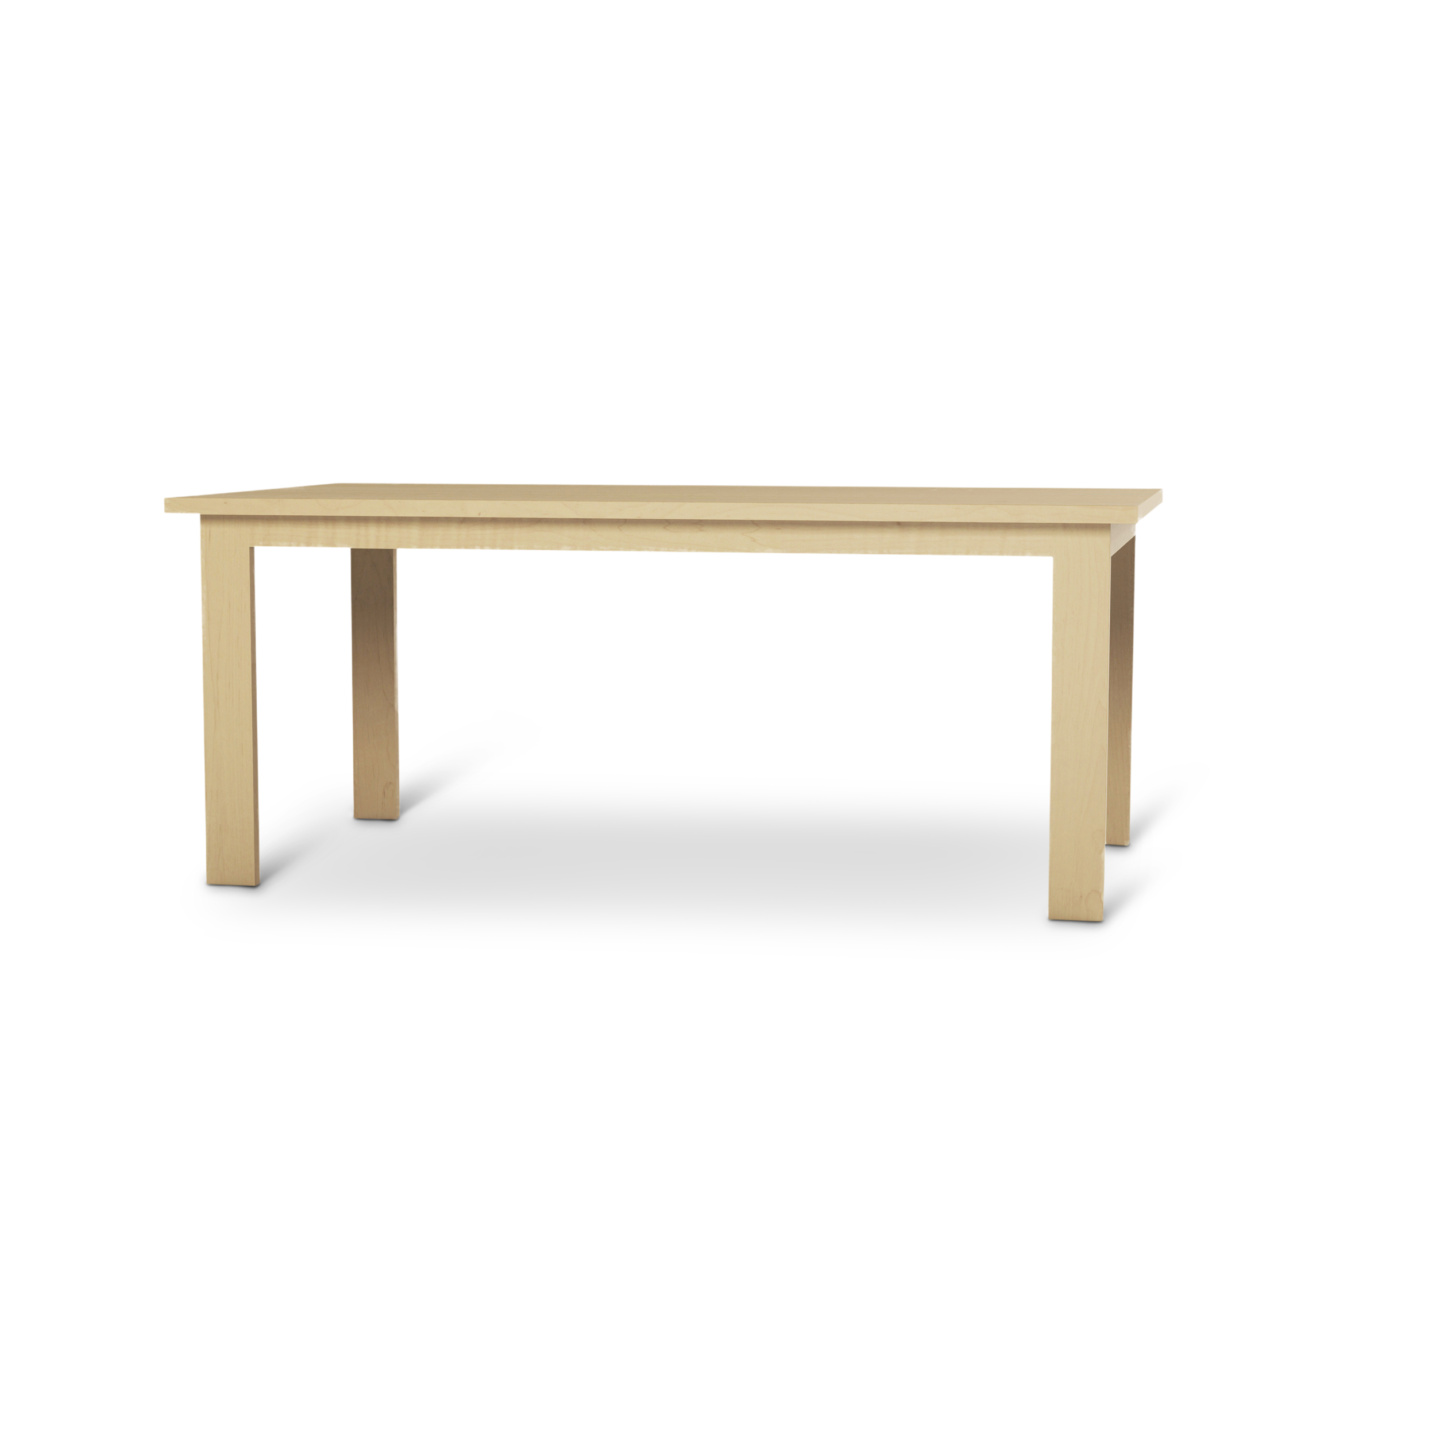 6 foot Solid Maple Modern Kitchen Table